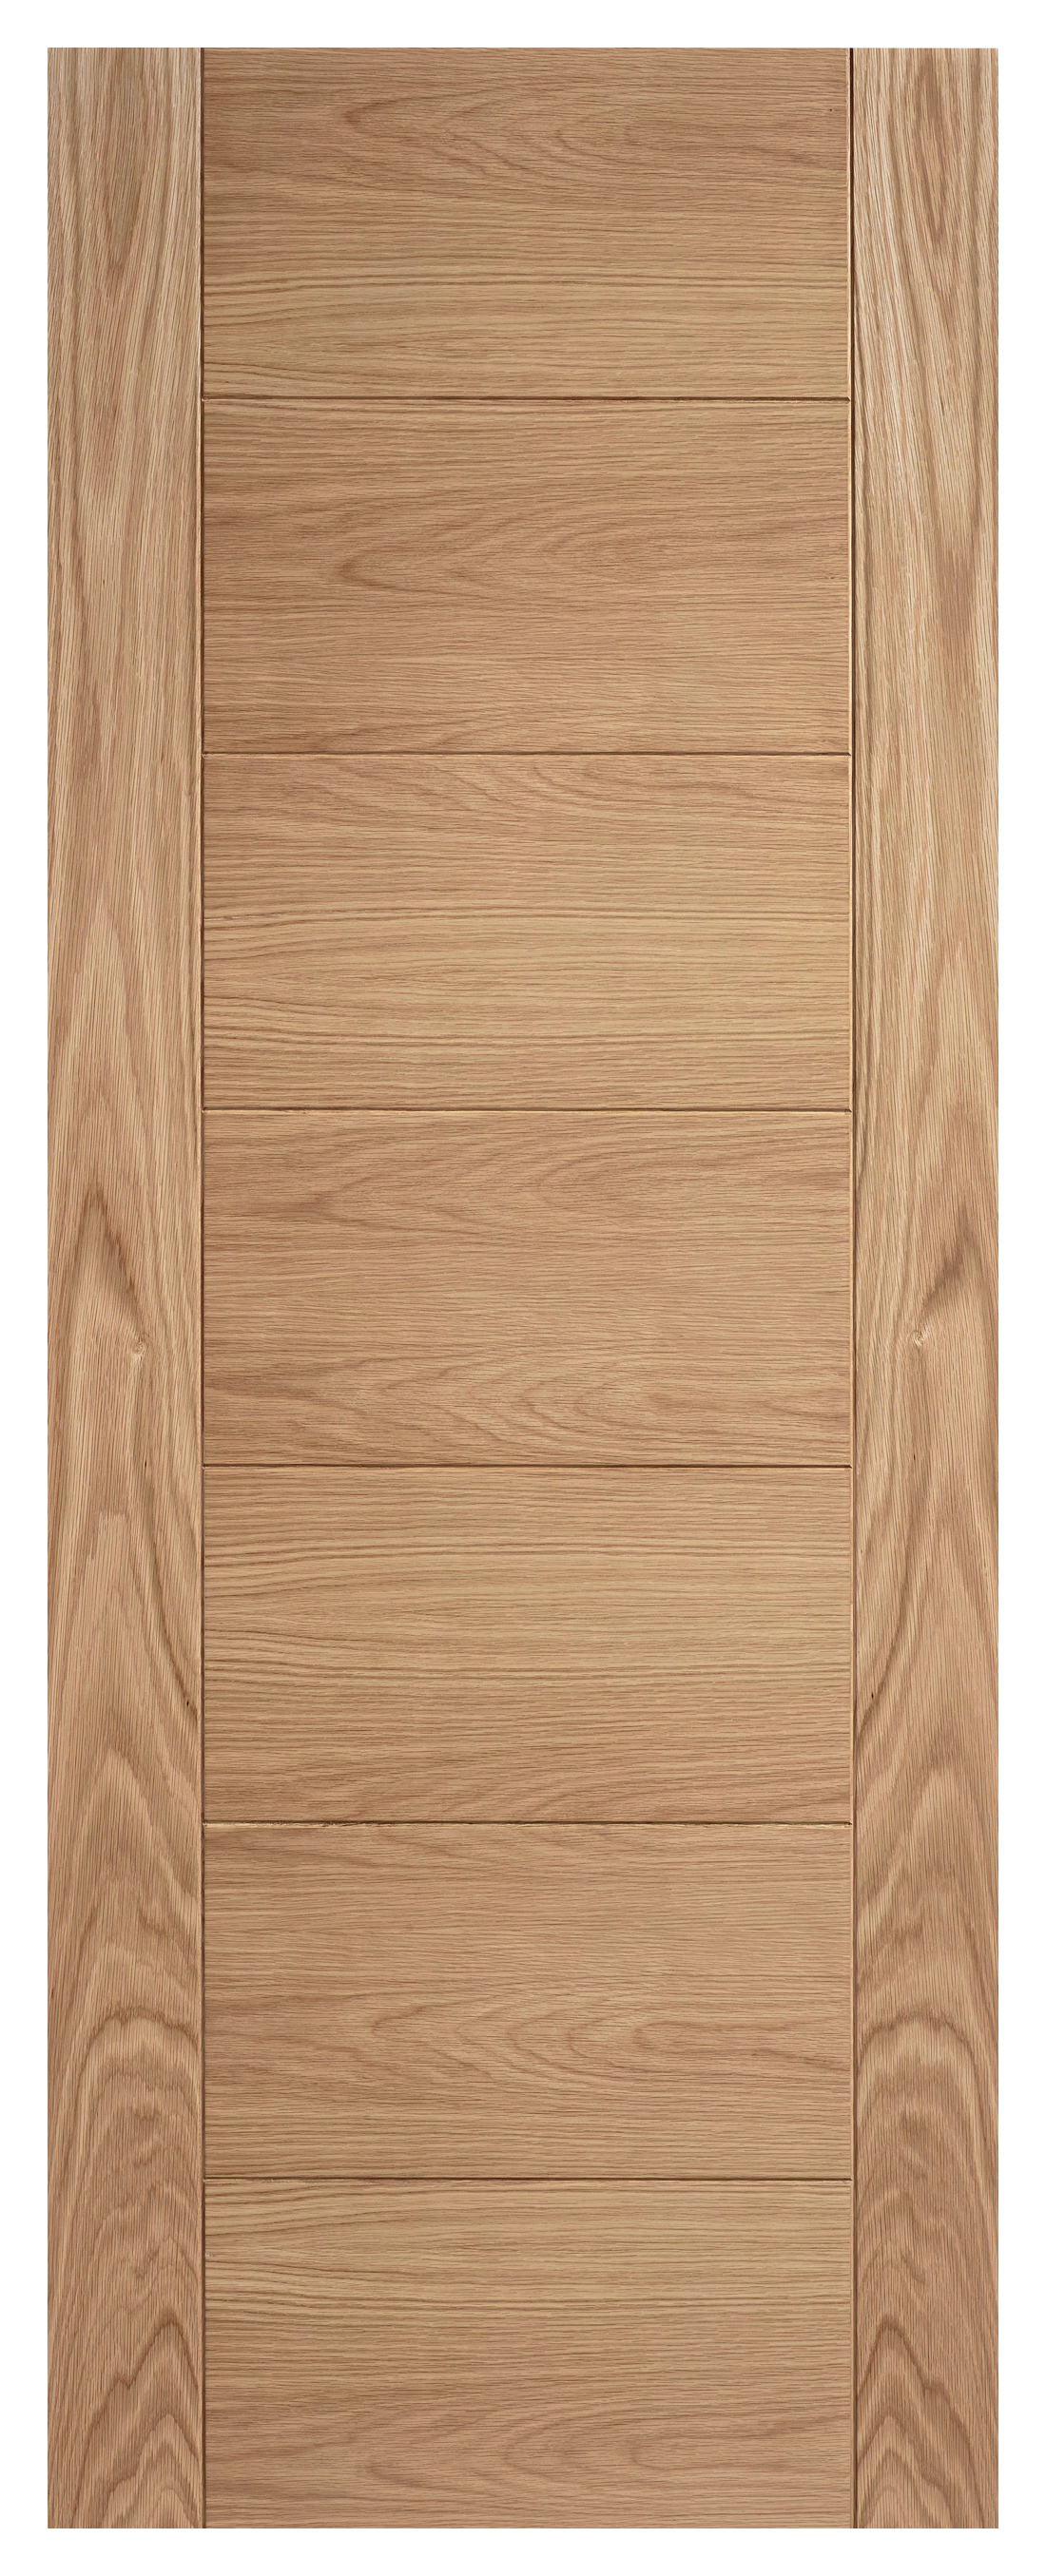 Image of LPD Internal Carini 7 Panel Pre-Finished Oak Solid Core Door - 826 x 2040mm